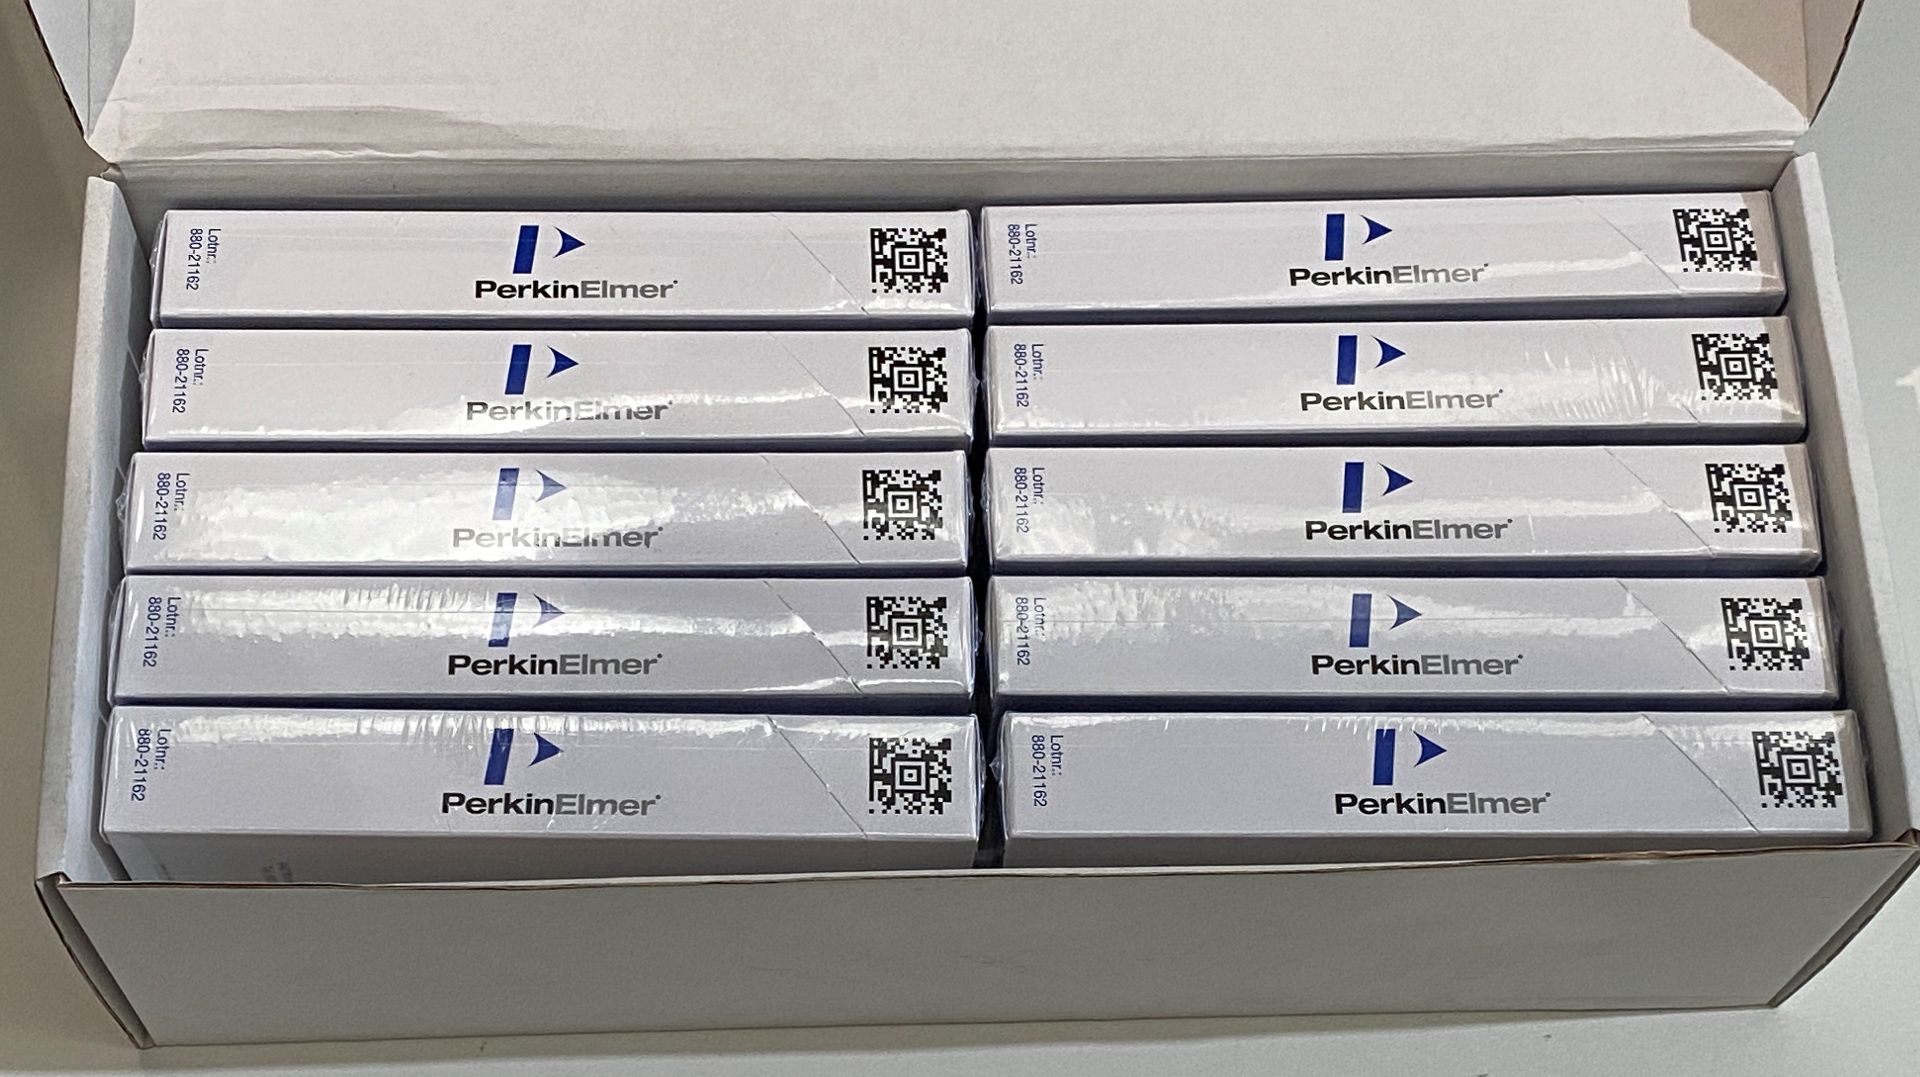 200 x Packs of PerkinElmer Top Seal - A Plus 6050185 clear adhesive microplate seals - 100 units - Image 2 of 5